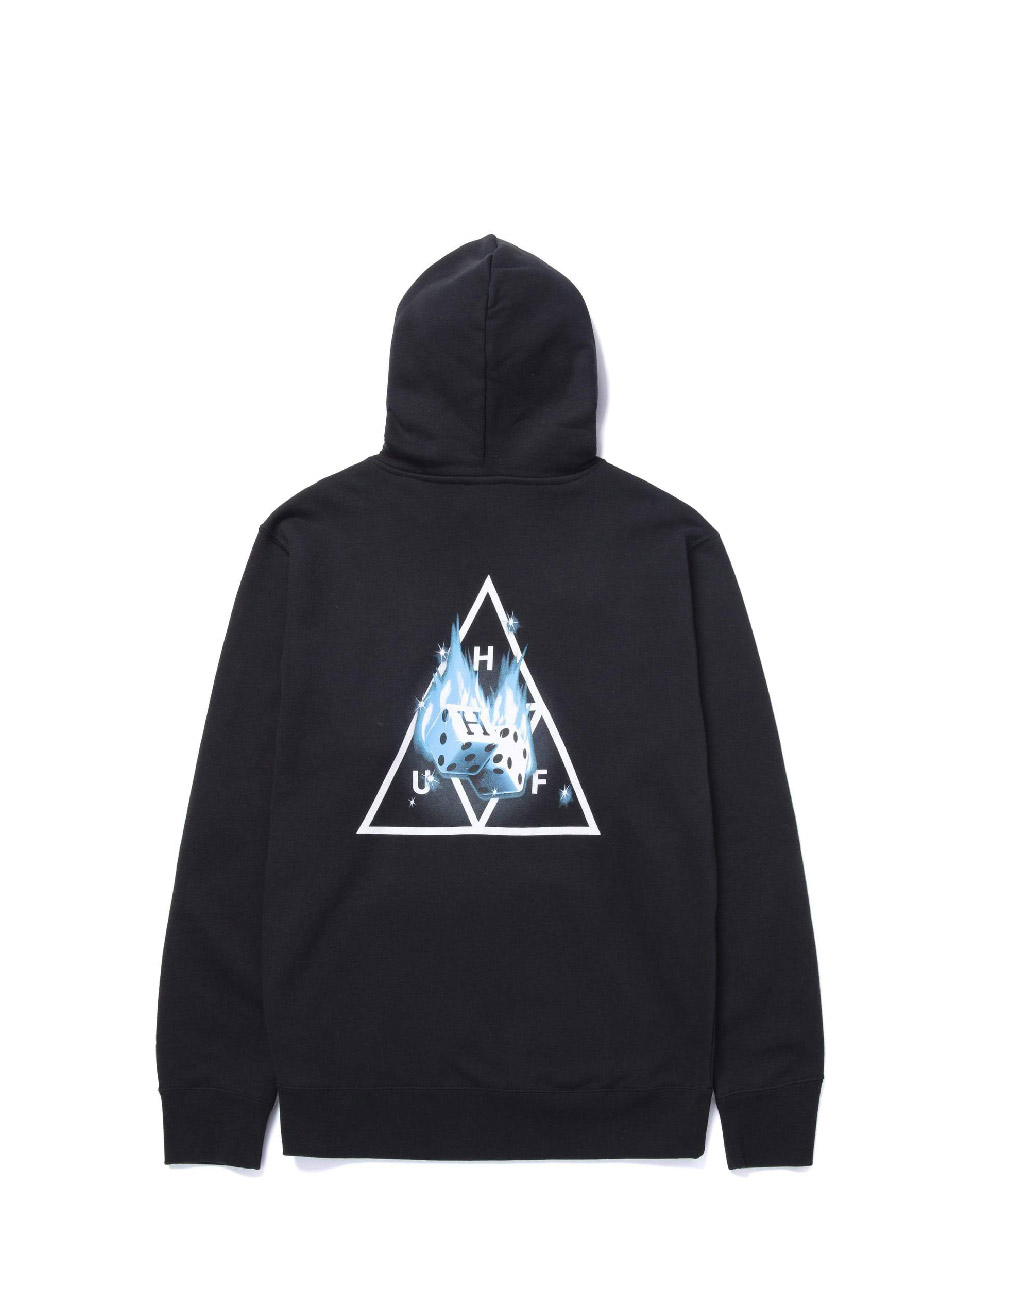 HUF – Hot dice triple triangle pullover hoodie